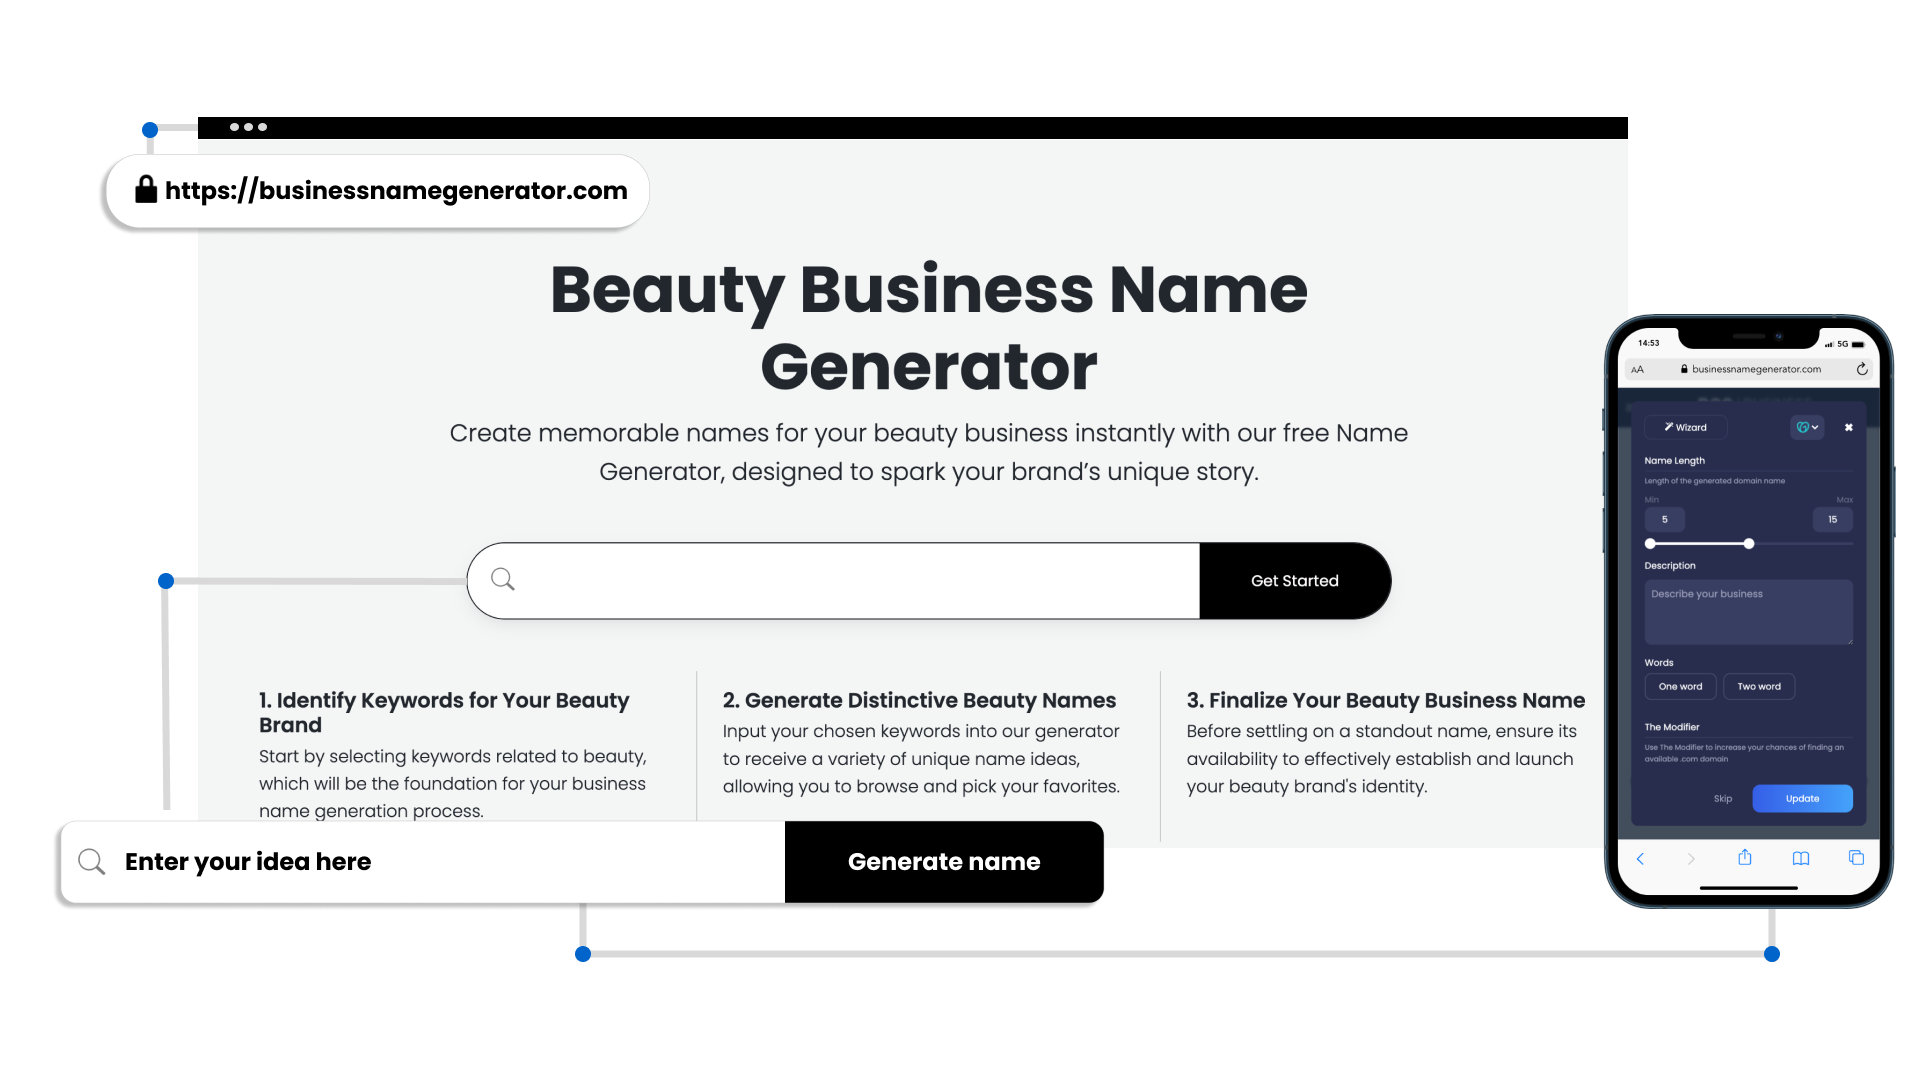 How to use our Beauty Business Generator